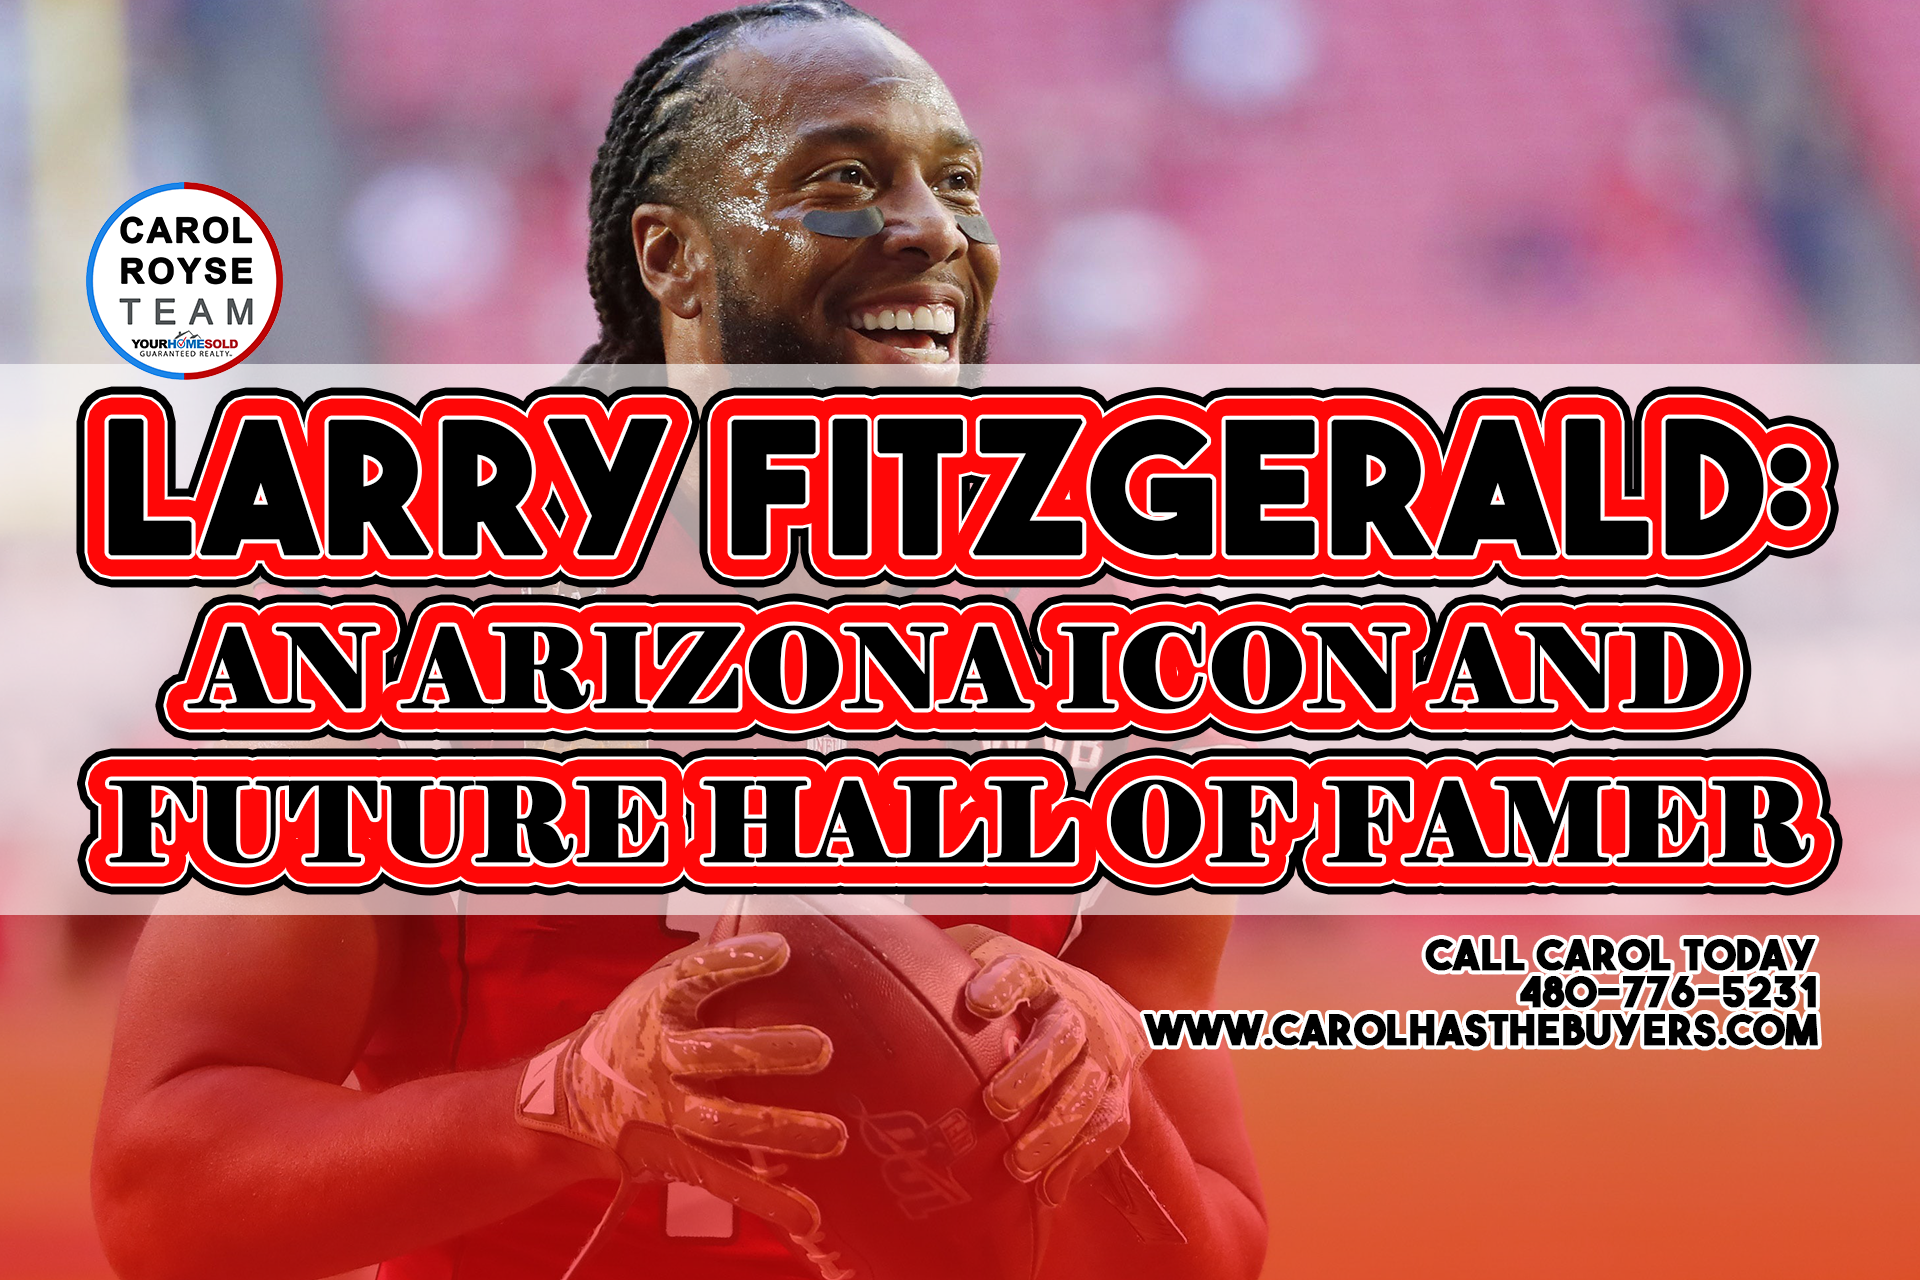 Larry Fitzgerald: An Arizona Icon and Future Hall of Famer